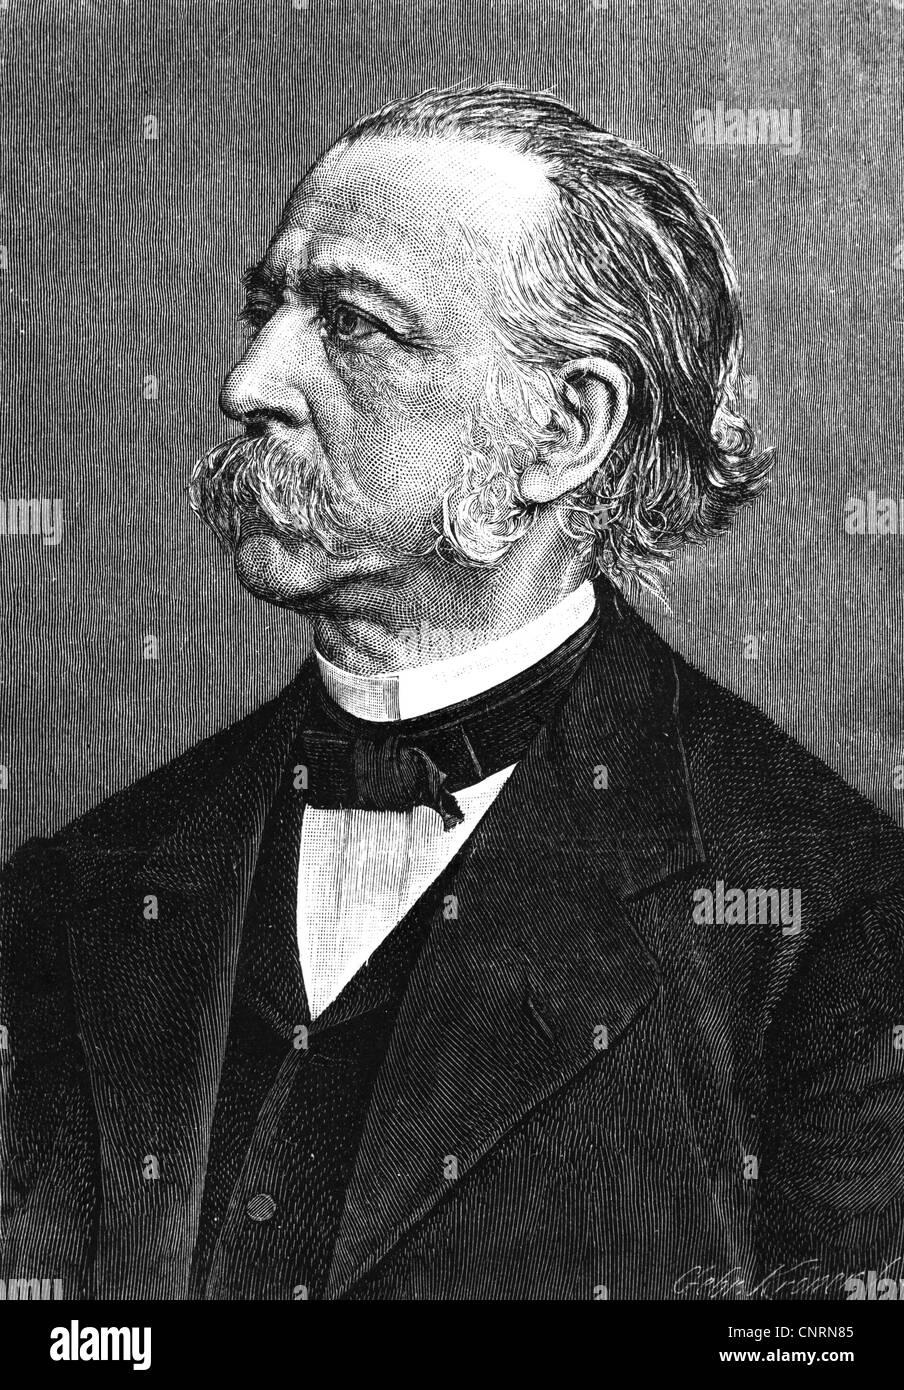 Fontane, Theodor, 30.12.1819 - 20.9.1898, German author / writer, portrait, wood engraving after photo by Loescher and Petsch, Berlin, 1882, Stock Photo